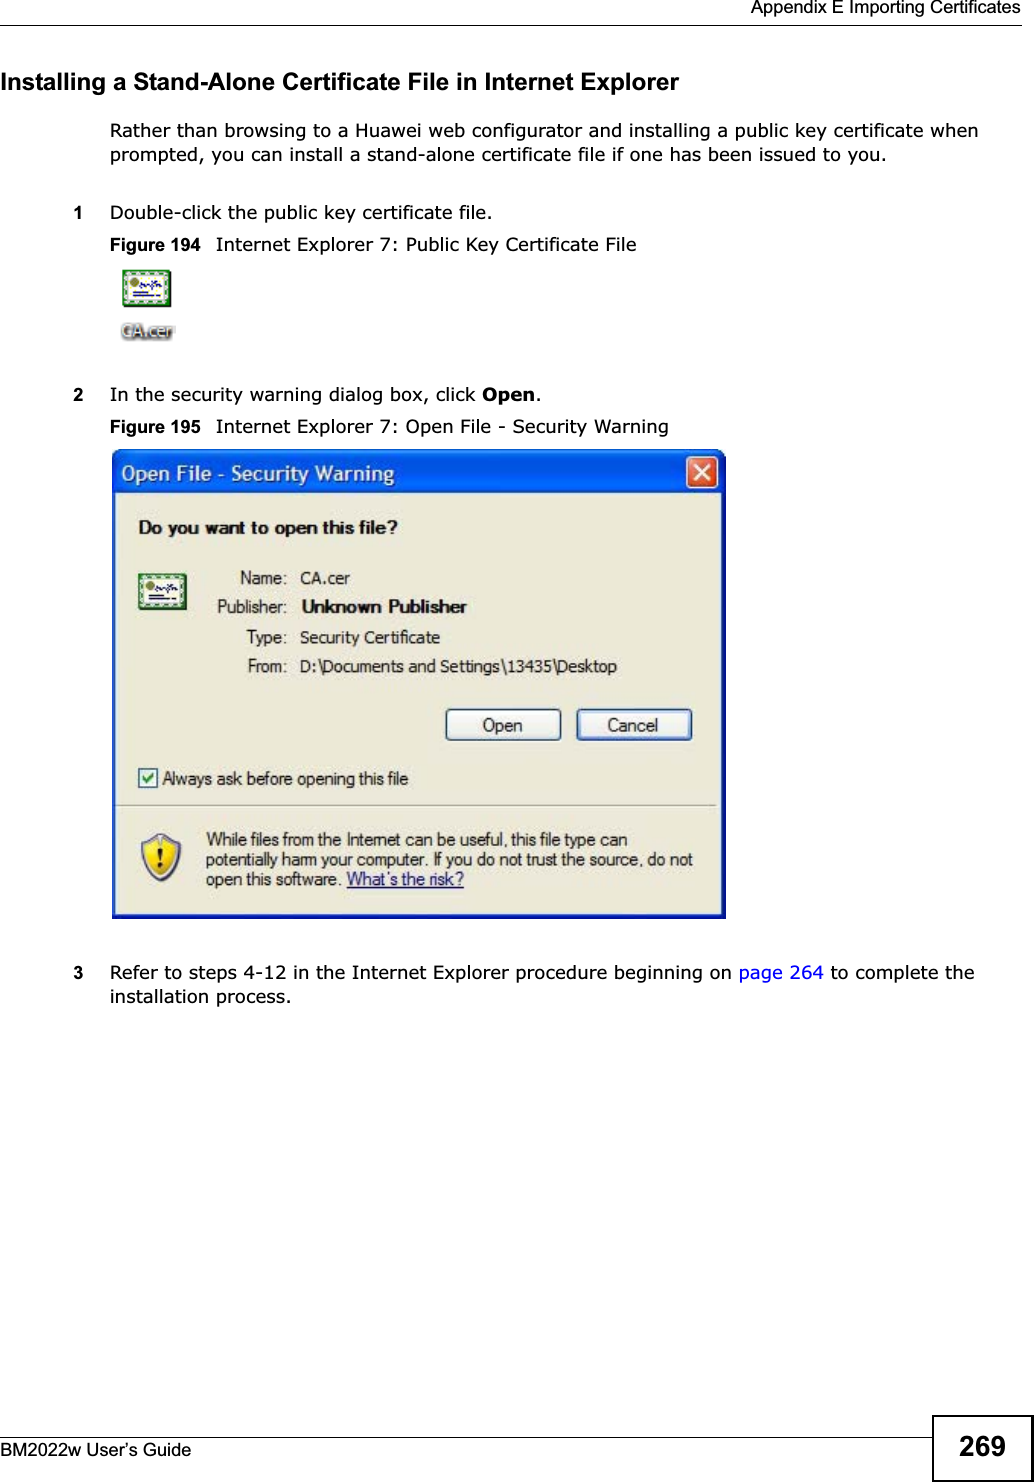  Appendix E Importing CertificatesBM2022w User’s Guide 269Installing a Stand-Alone Certificate File in Internet ExplorerRather than browsing to a Huawei web configurator and installing a public key certificate when prompted, you can install a stand-alone certificate file if one has been issued to you.1Double-click the public key certificate file.Figure 194   Internet Explorer 7: Public Key Certificate File2In the security warning dialog box, click Open.Figure 195   Internet Explorer 7: Open File - Security Warning3Refer to steps 4-12 in the Internet Explorer procedure beginning on page 264 to complete the installation process.